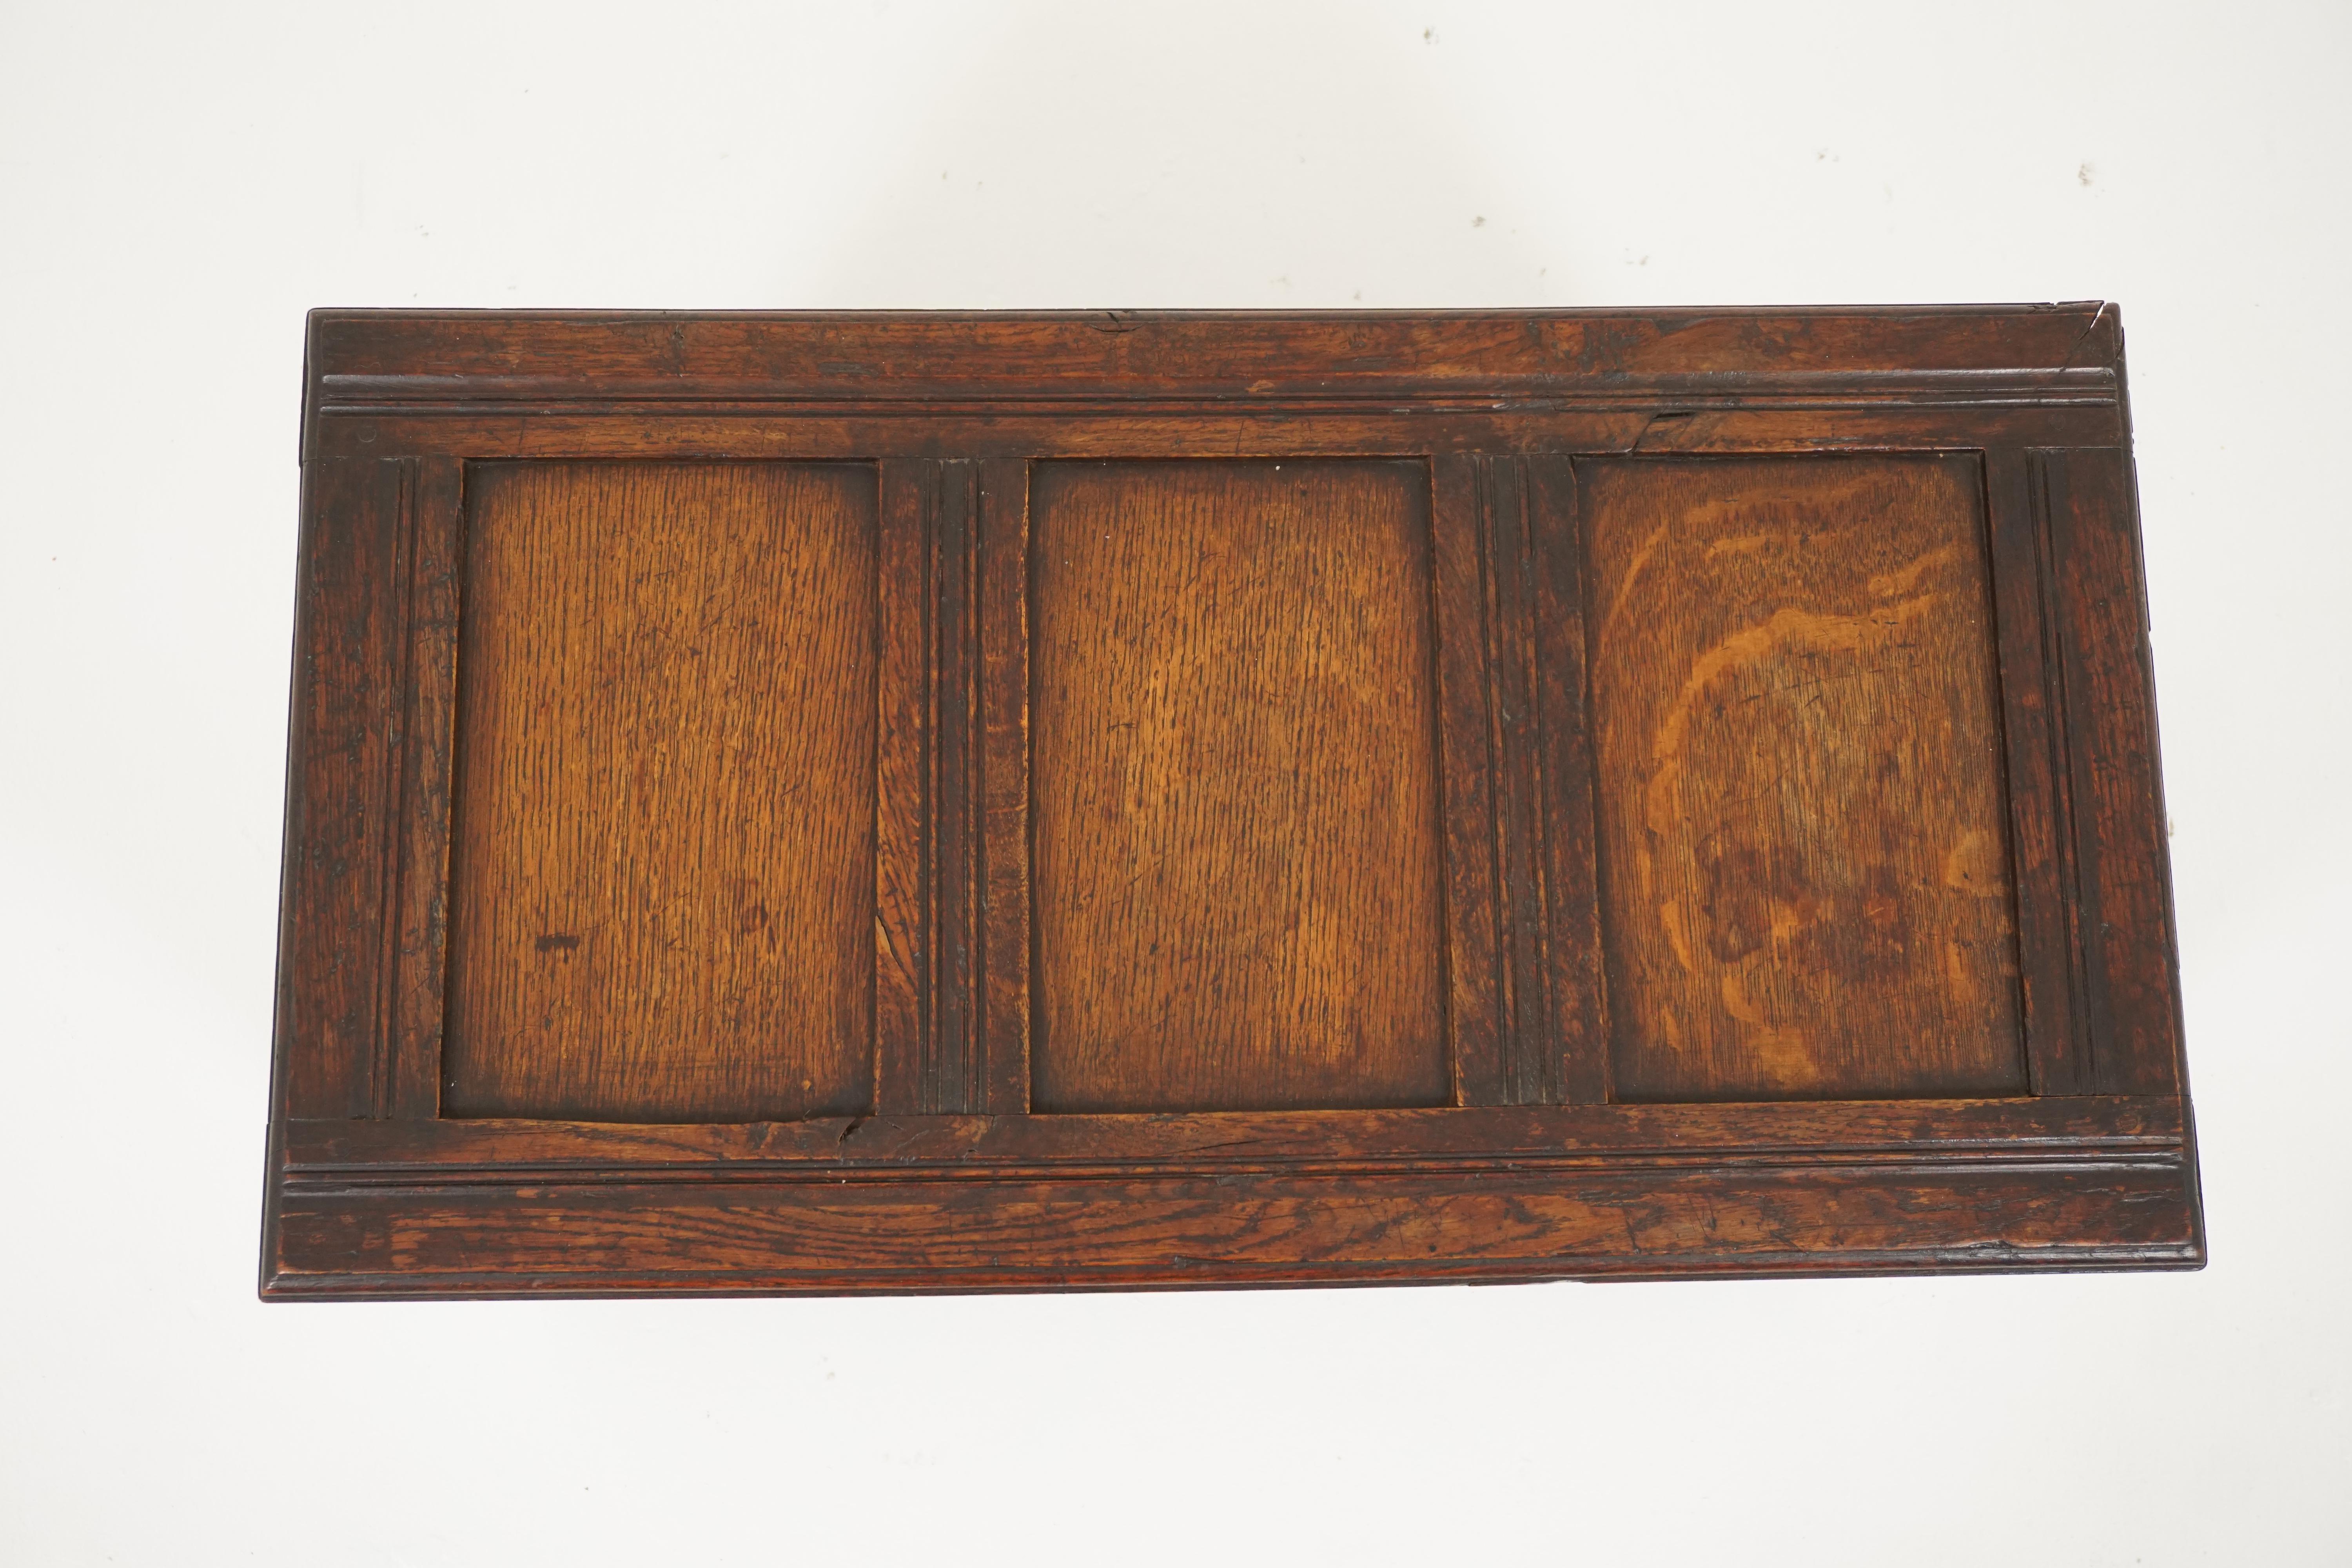 Antique oak coffer, kist, or trunk, antique furniture, Scotland, 1910, B1944

Scotland, 1910
Solid oak
Original finish
Triple-panel top
Three vertical panels to the front
The lid with scribed edge
Lid opens to reveal generous storage